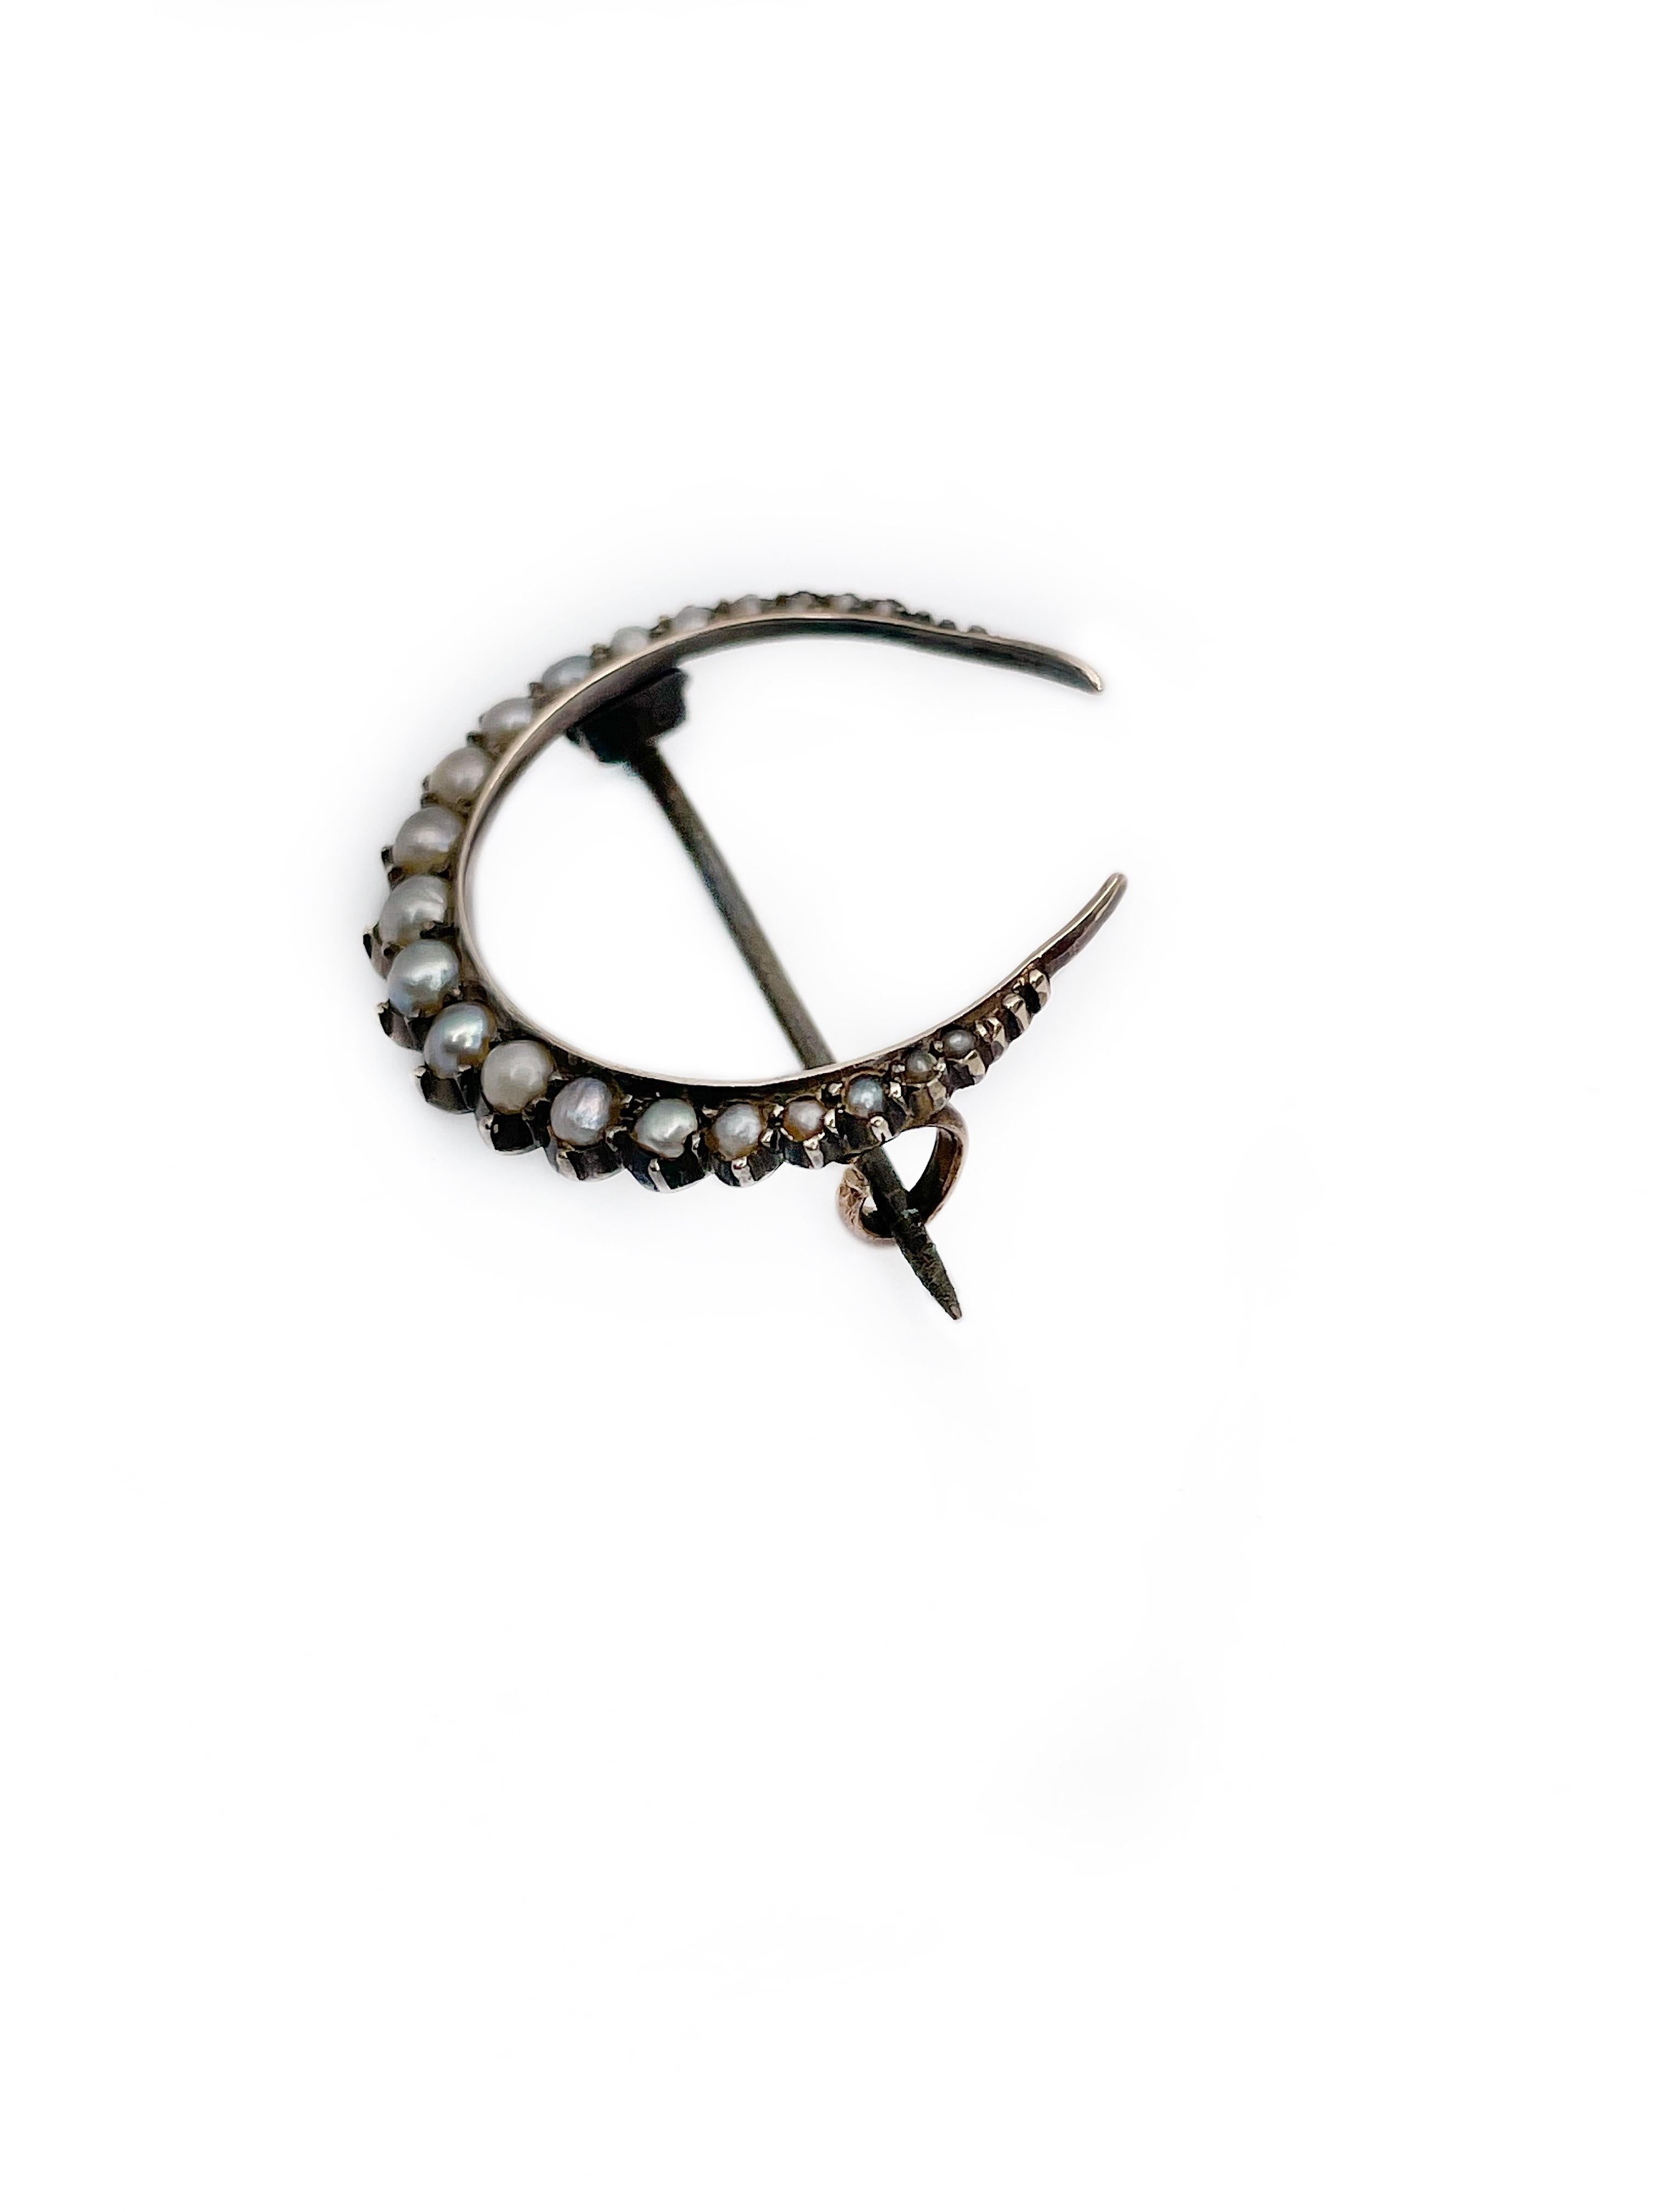 It is a delicate Victorian crescent moon pin brooch crafted in 14K yellow gold and adorned with silver. It features 21 seed pearls.

Weight: 2.04g
Size: 2.3x2.4cm

———

If you have any questions, please feel free to ask. We describe our items